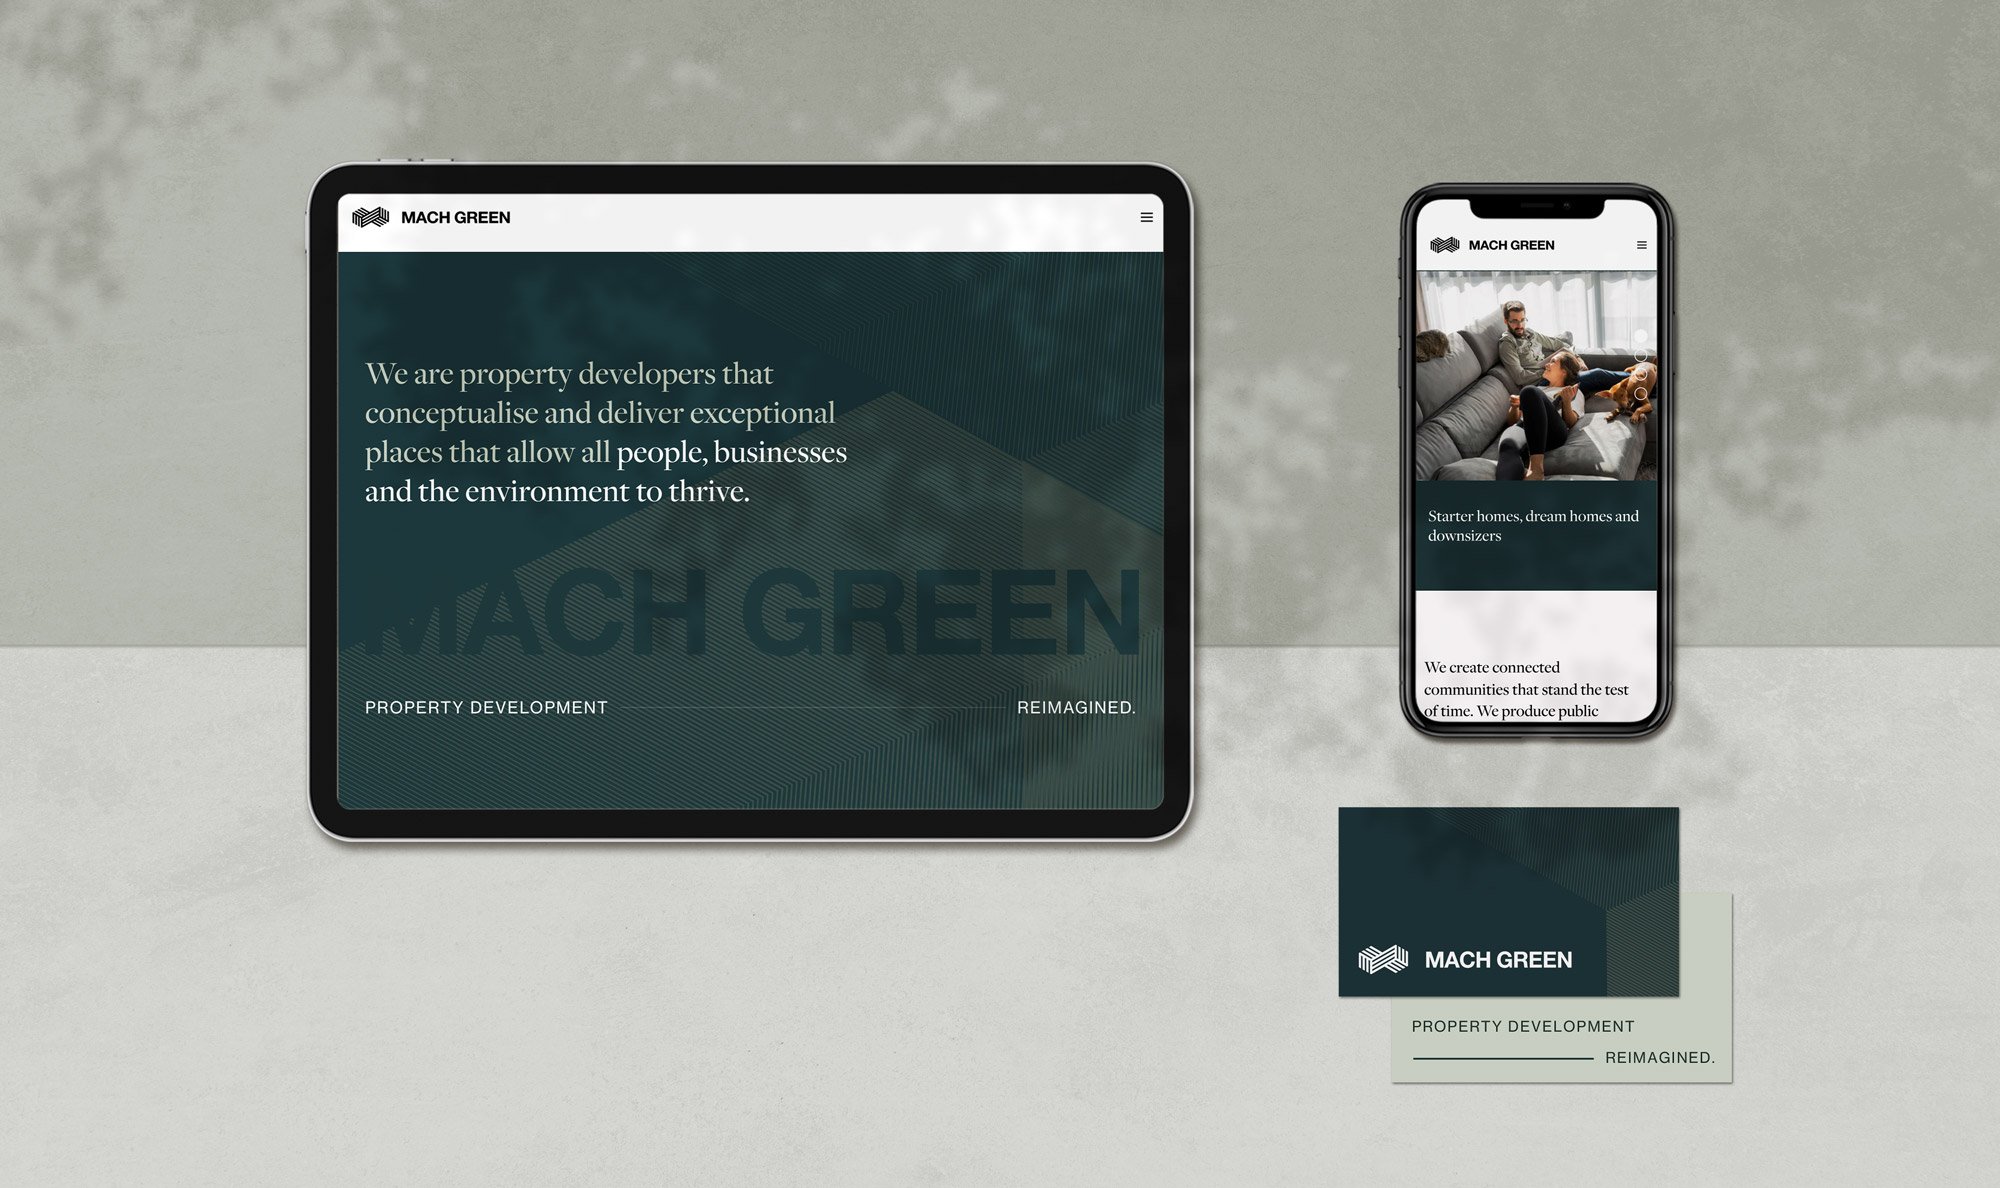 Mach Green Property Developer Website Design on mobile and ipad